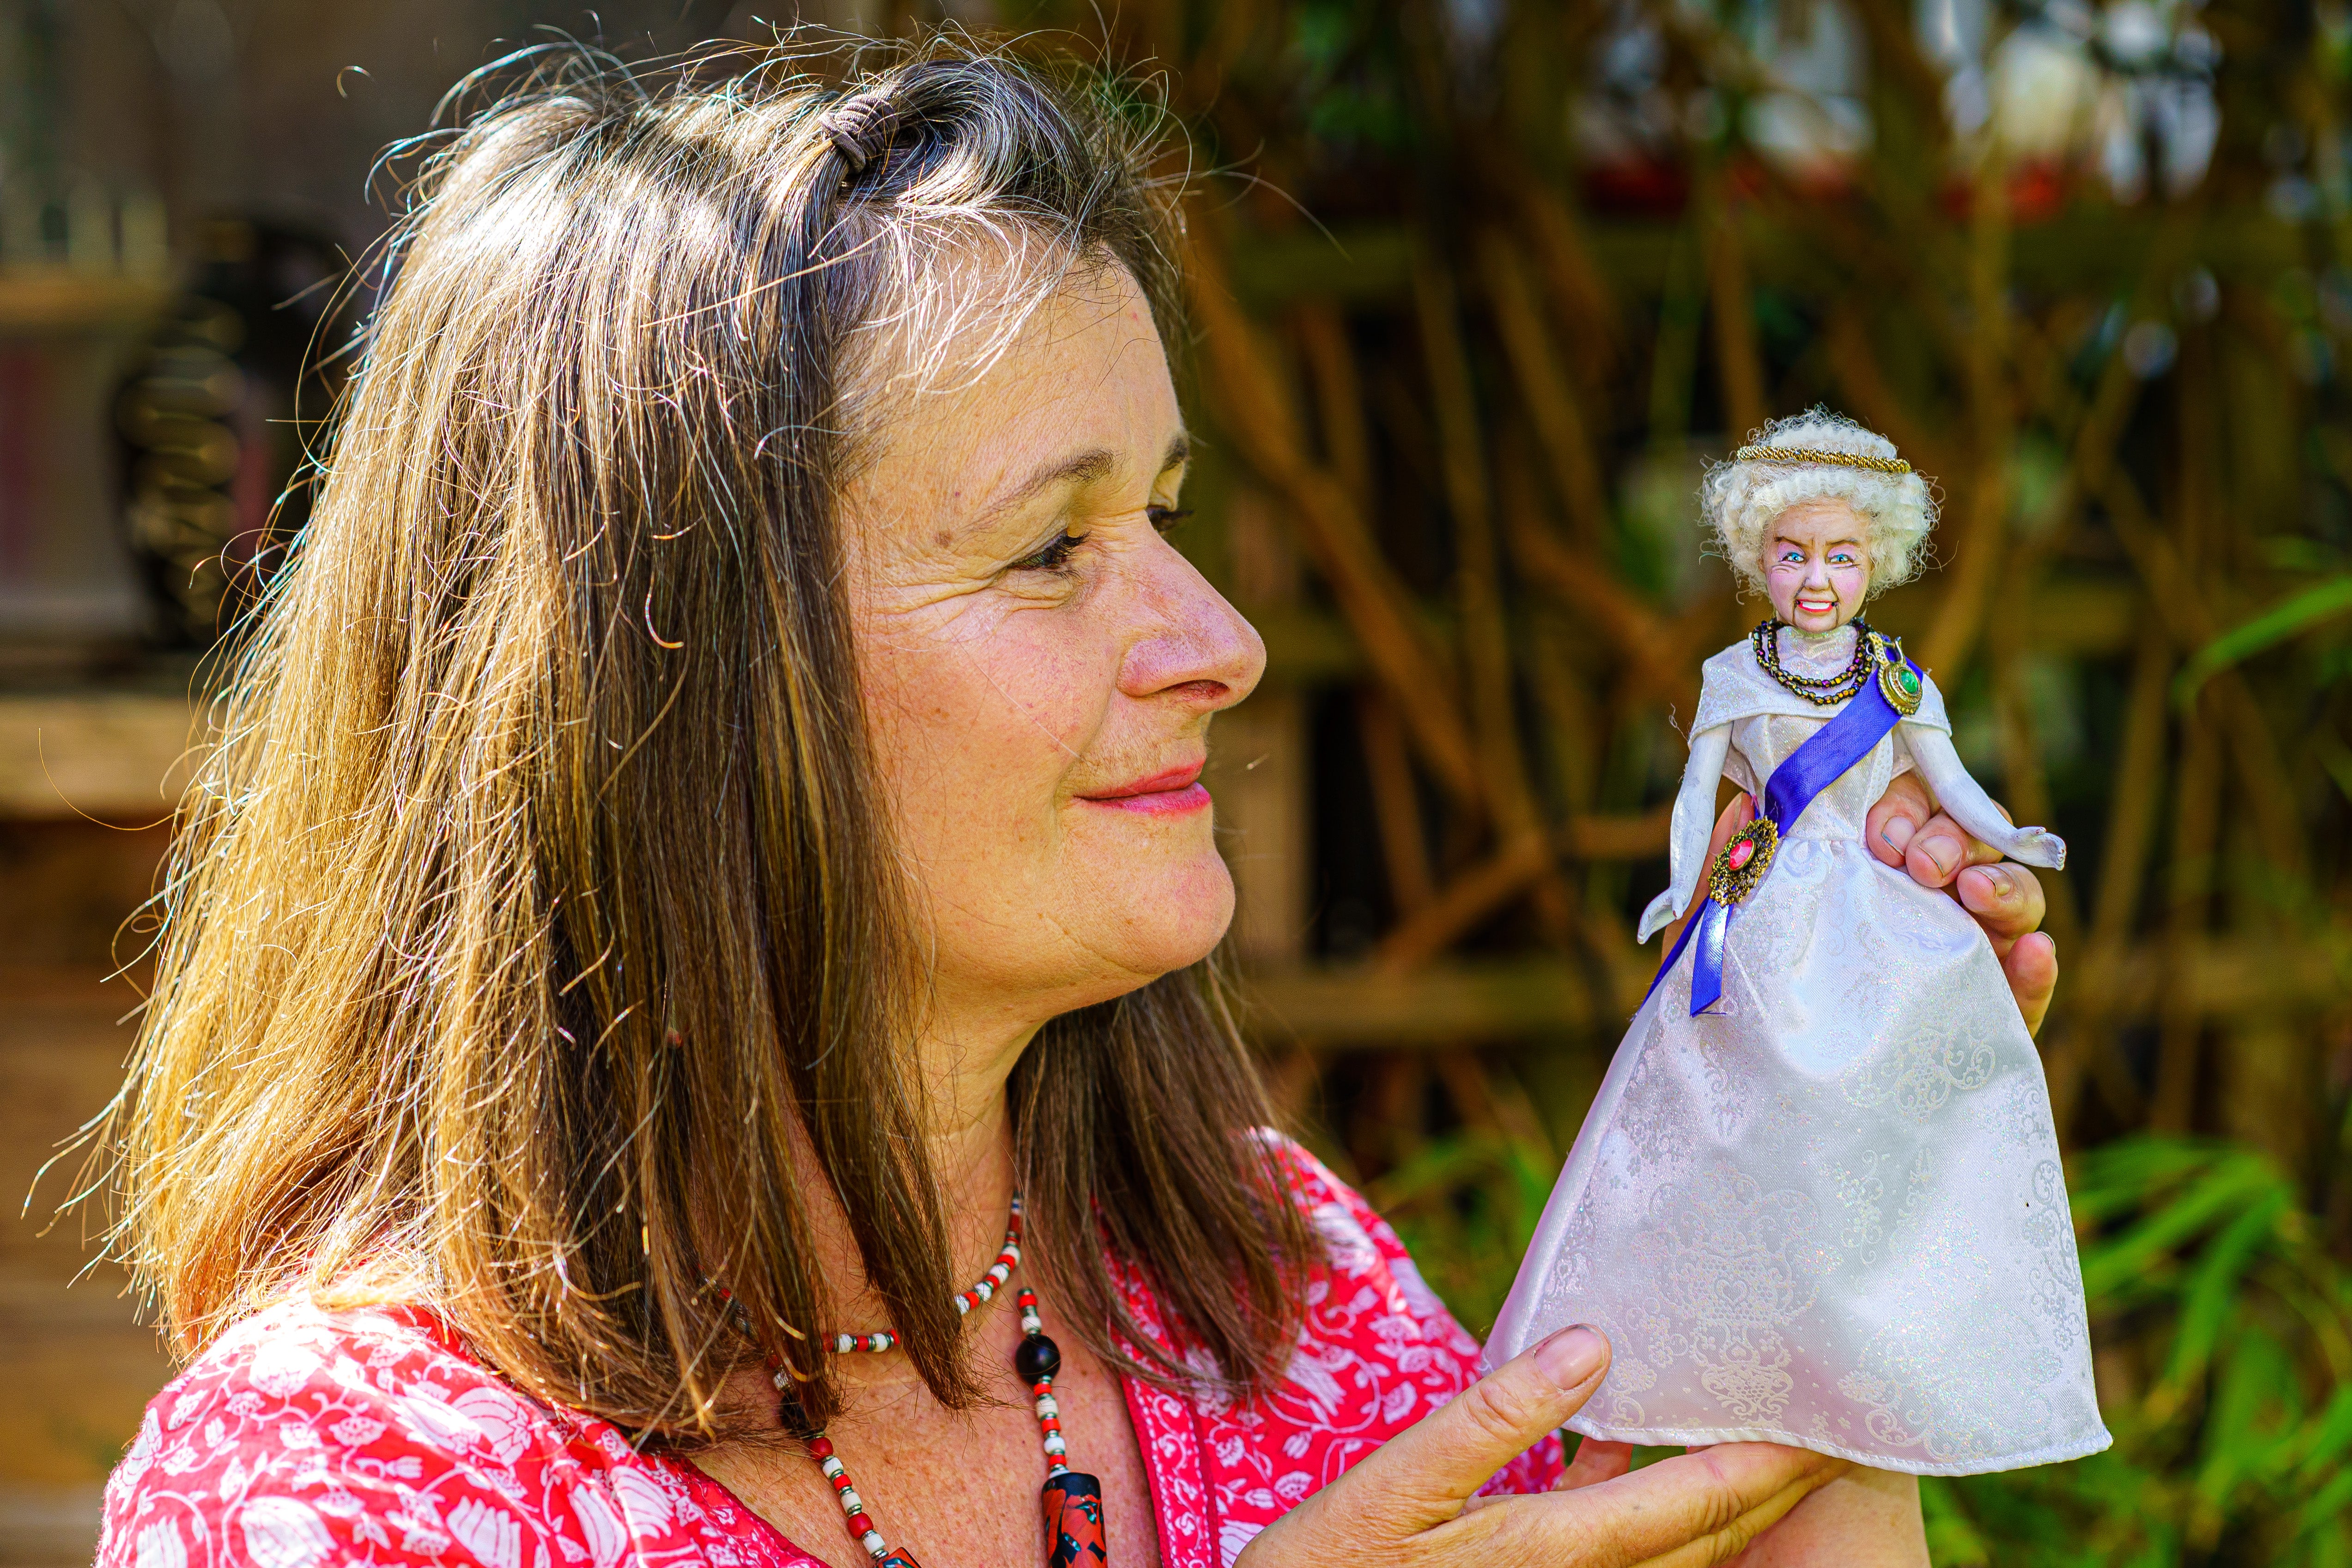 Artist Lou Gray, 61, holds a figure she made of Queen Elizabeth II at her home studio in Bristol, where she creates characters made from old dolls including Barbie, Ken and Action Man, plus other assorted miniature doll figures (Ben Birchall/PA Wire/PA Real Life)